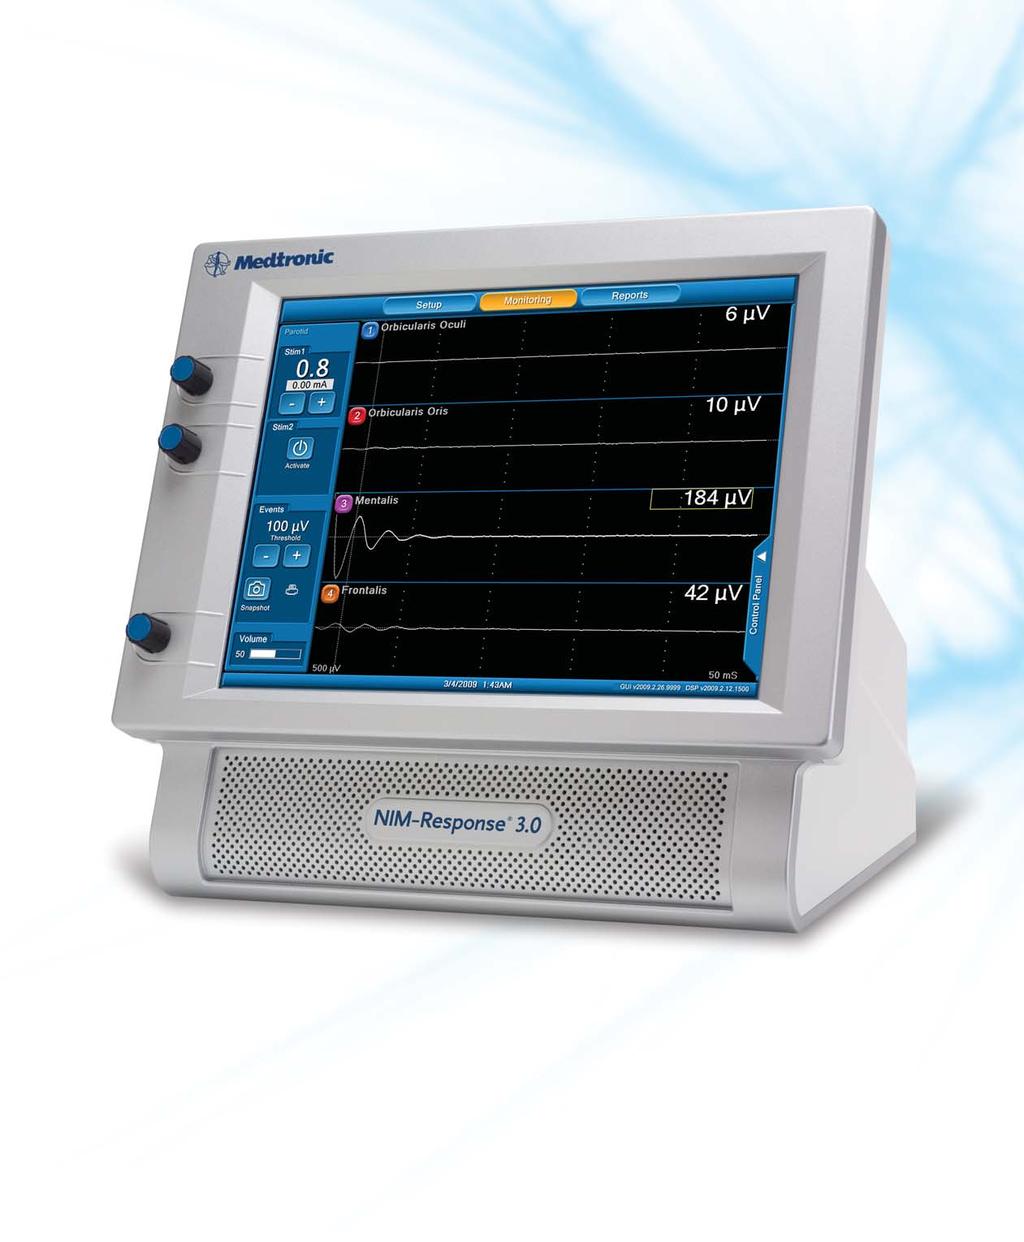 Nerve Integrity Monitoring System Three User Environments Setup, Monitoring, Reports Intuitive Navigation Bar Always at top of screen Side tabs access other settings Better, Faster Touchscreen